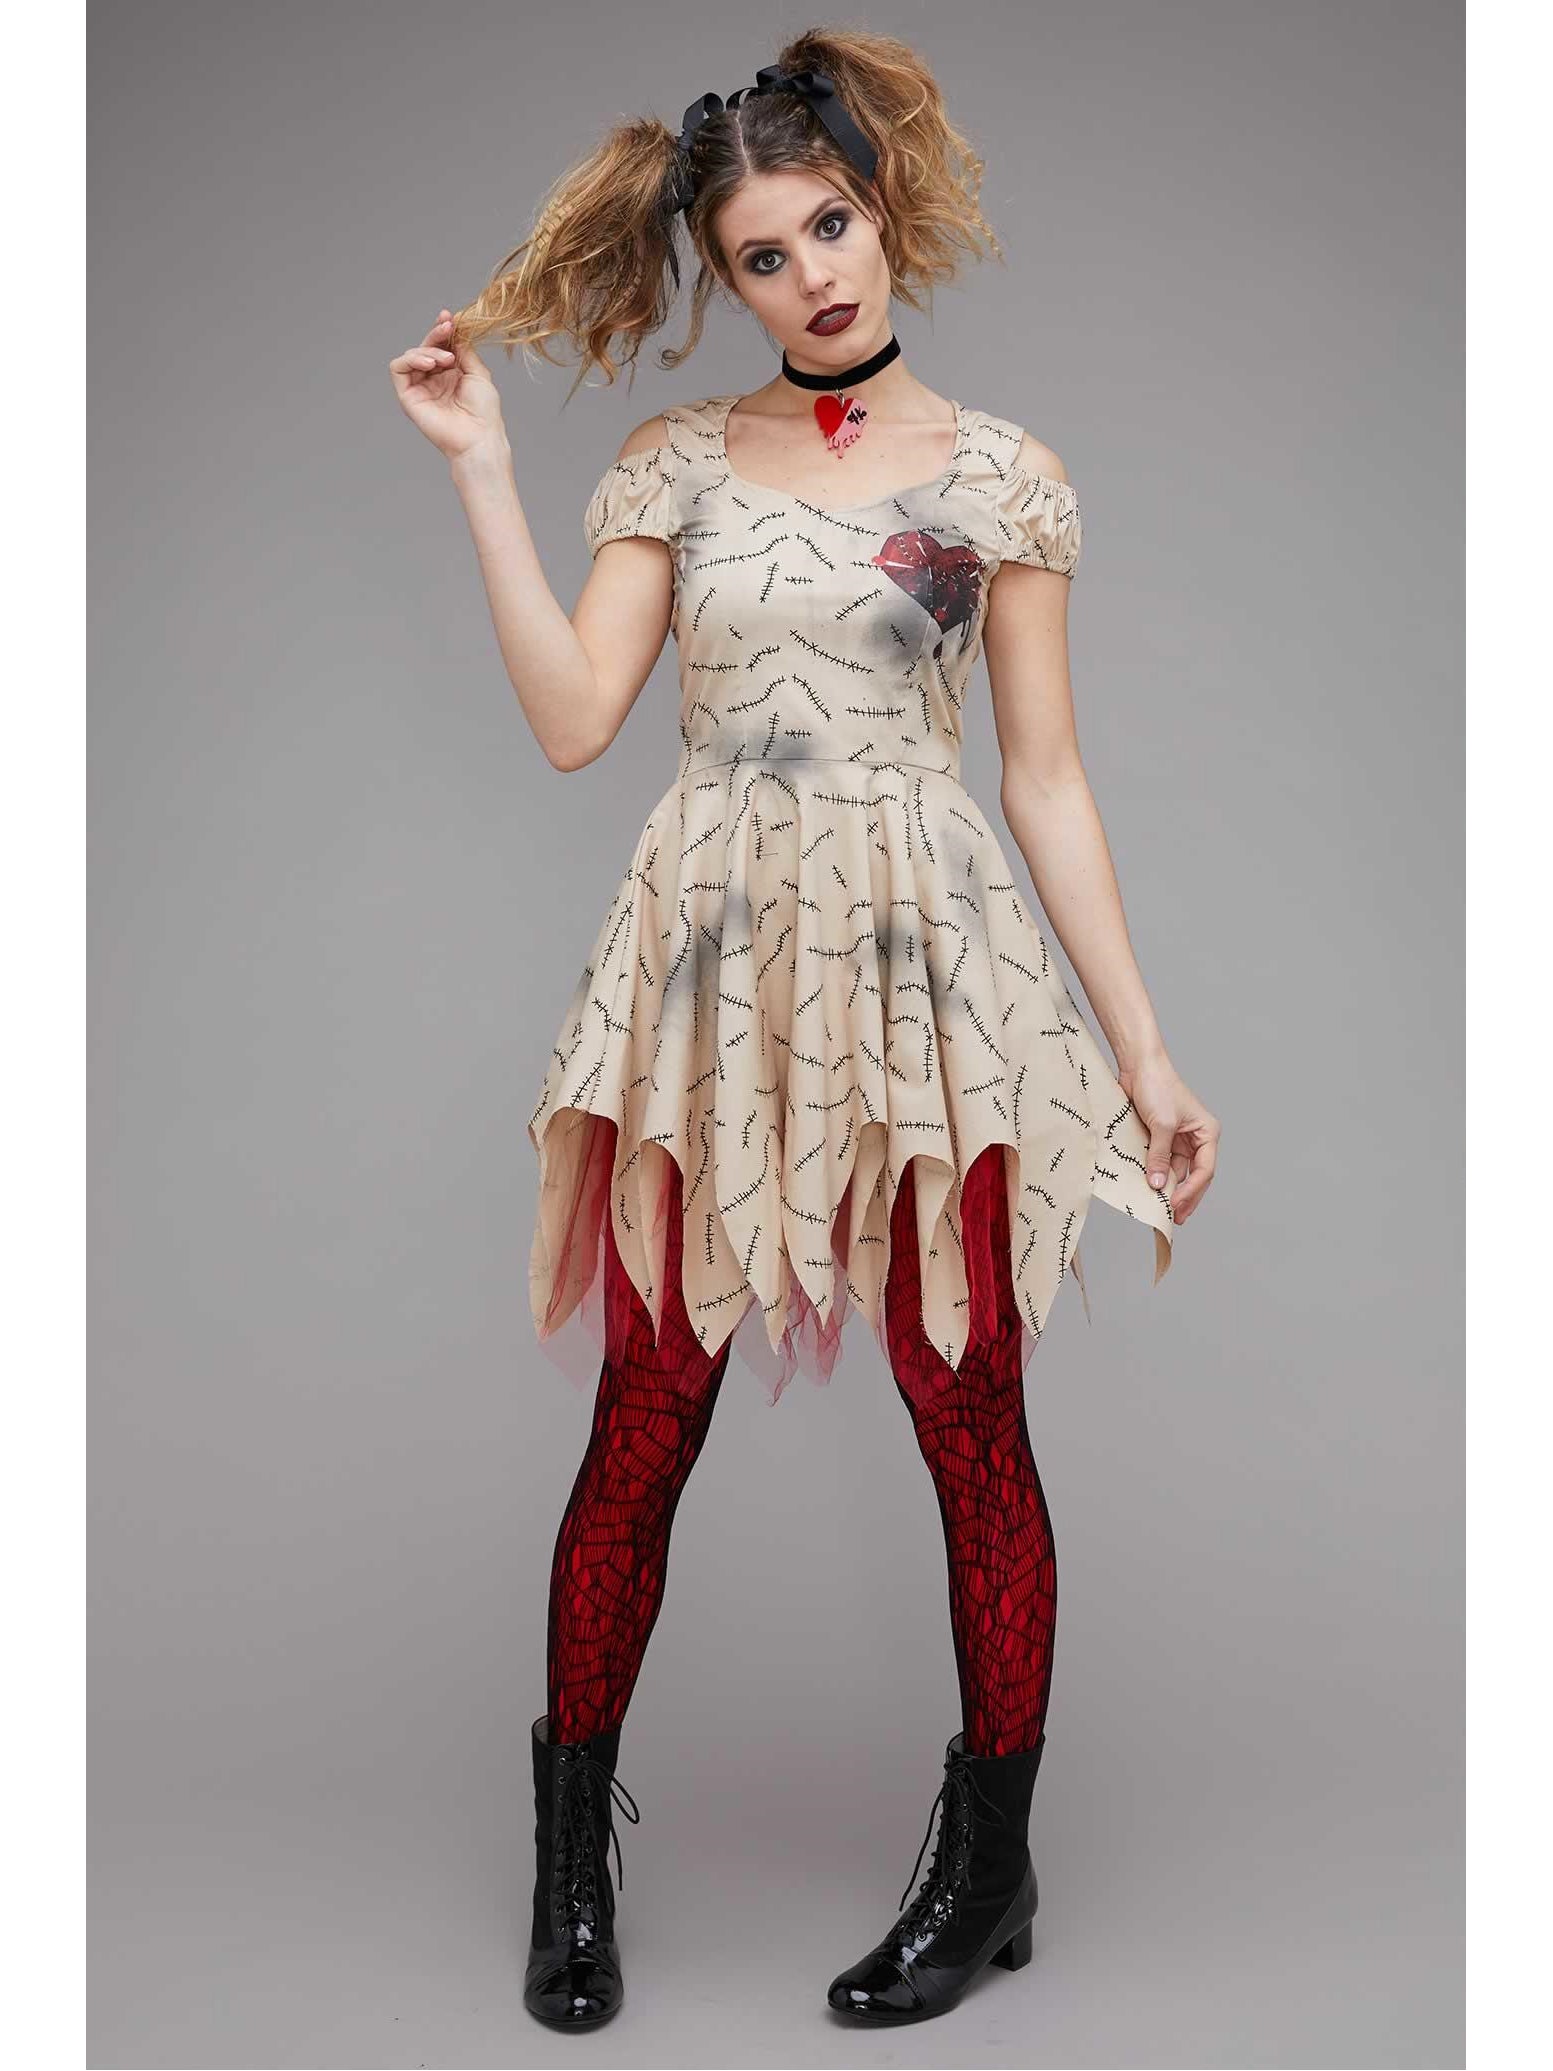 Voodoo Doll Costume for Women - Chasing Fireflies